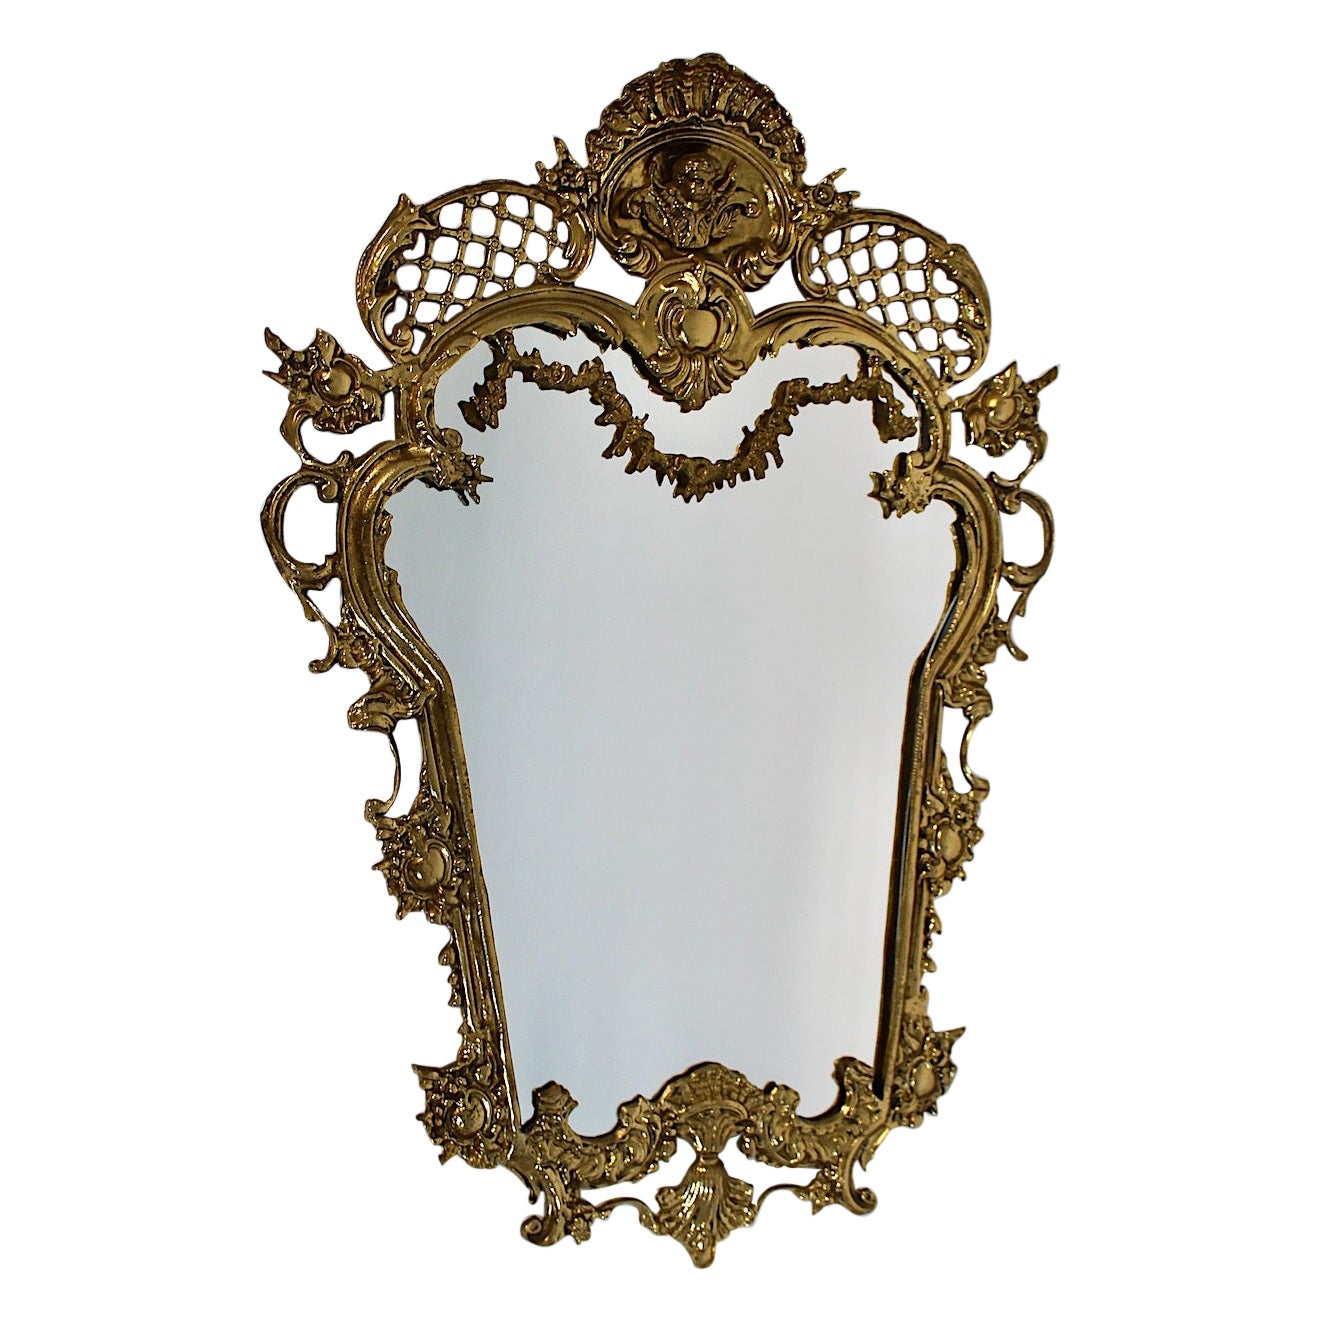 Modern Vintage Brass Wall Mirror Style Baroque Revival Italy 1970s For Sale